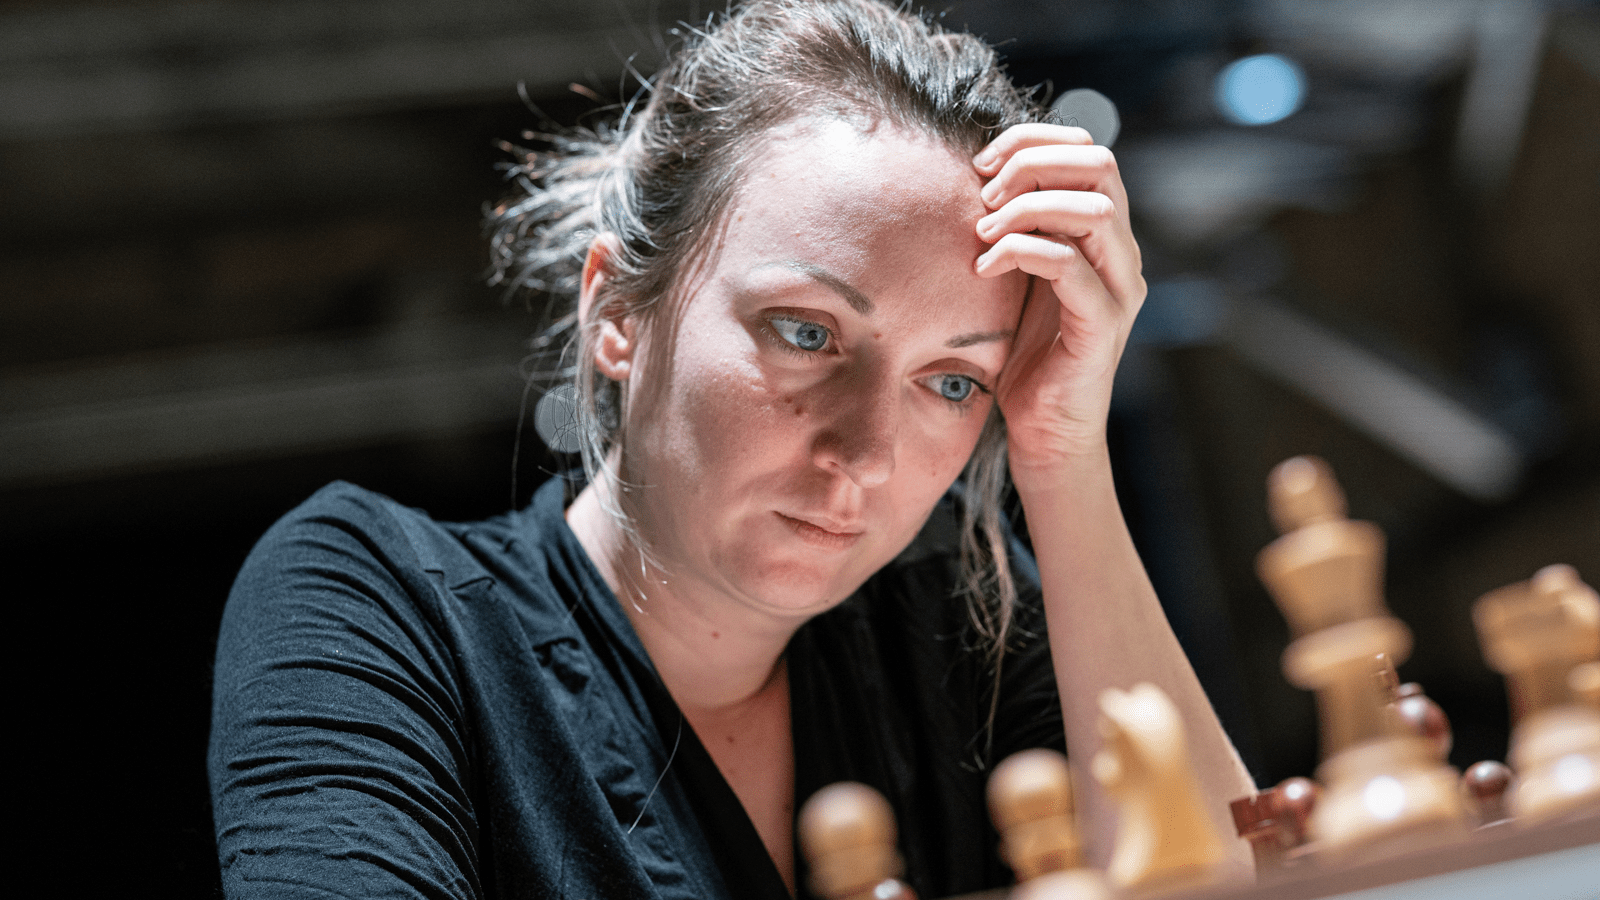 34 years after her - FIDE - International Chess Federation